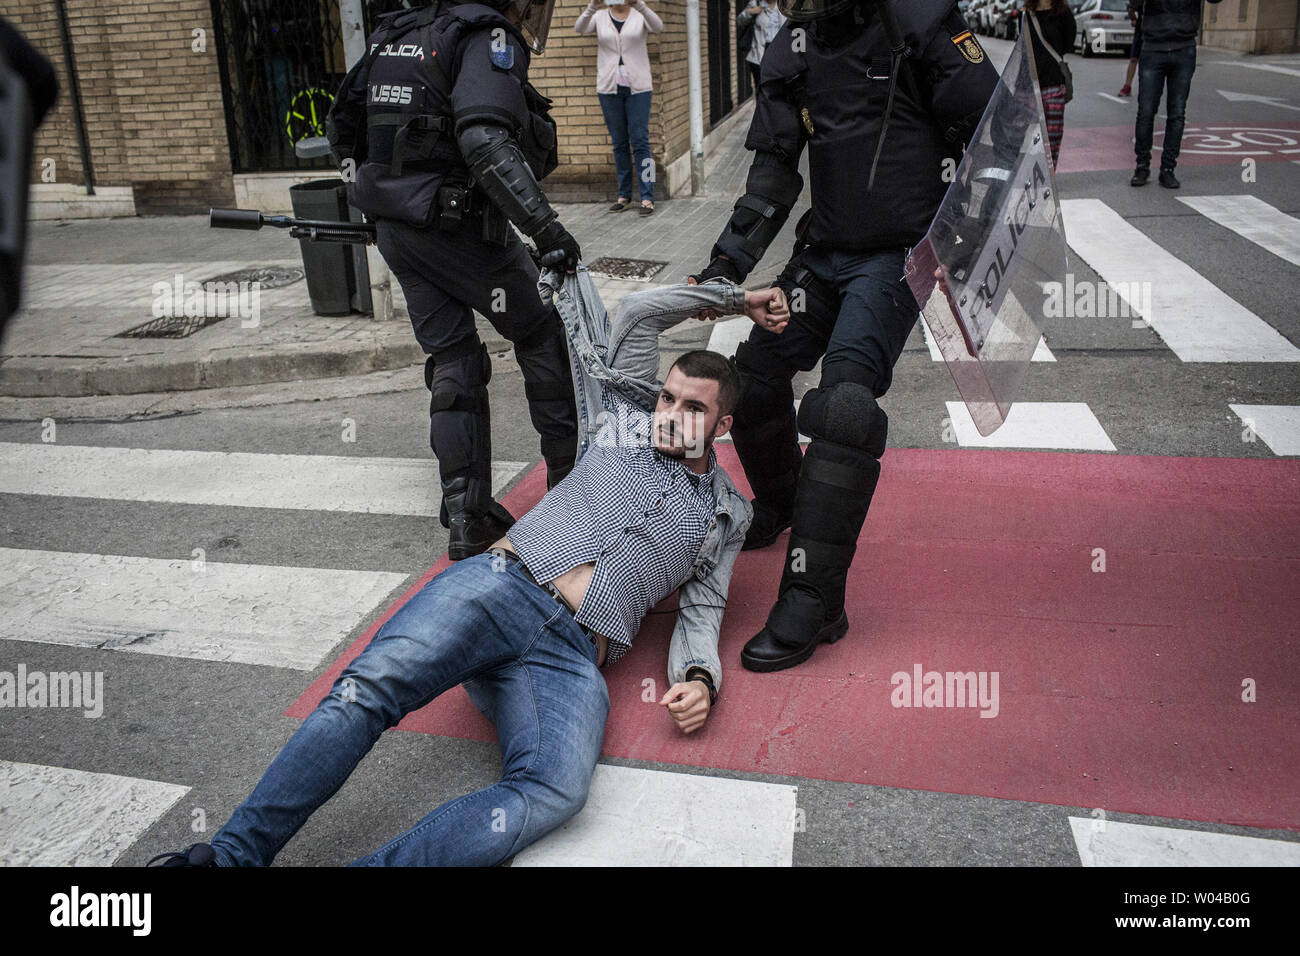 Spanish police pulls a man on entrance of a polling station in Barcelona, on October 1, 2017, on the day of a referendum on independence for Catalonia banned by Madrid. More than 5.3 million Catalans are called today to vote in a referendum on independence. photo by Angel Garcia/ UPI Stock Photo